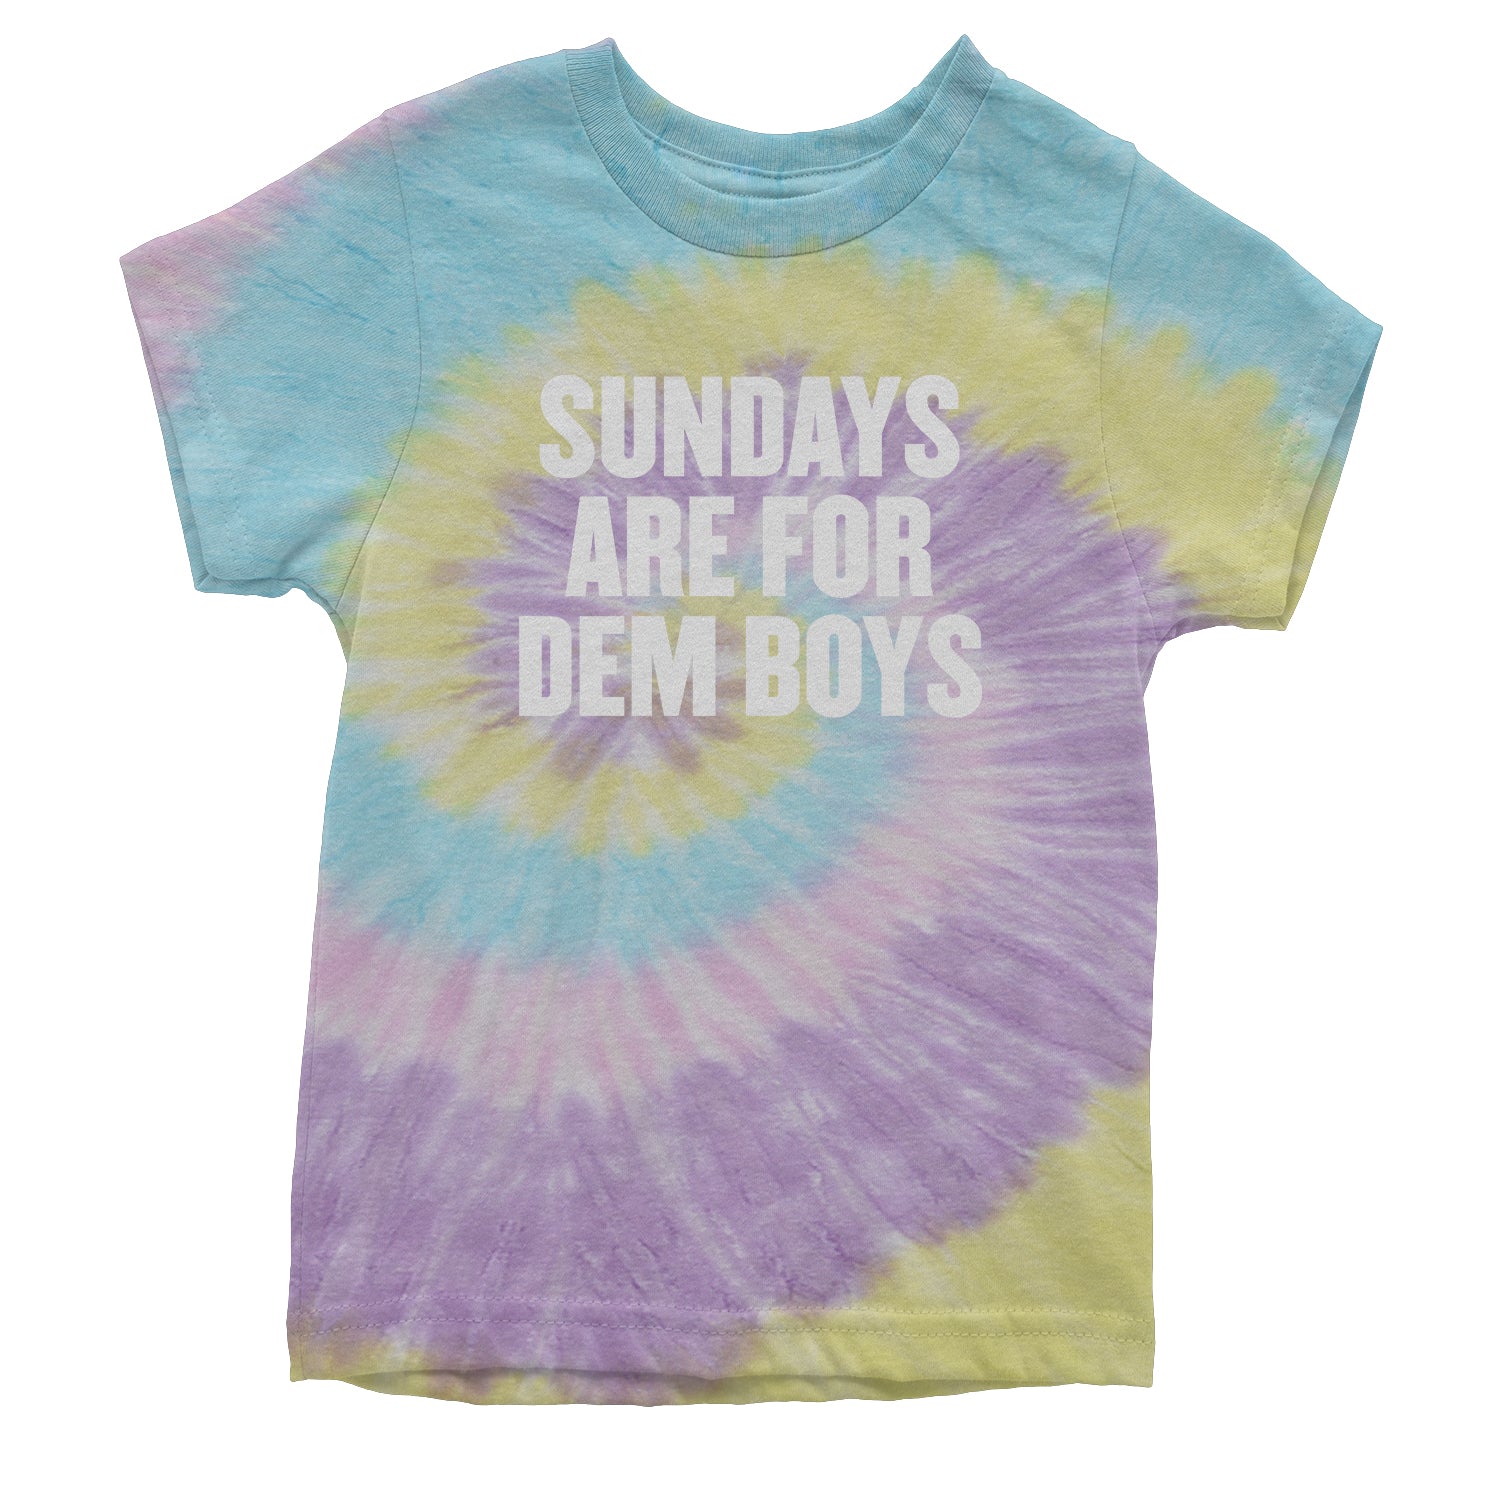 Sundays Are For Dem Boys Youth T-shirt dallas, fan, jersey, team, texas by Expression Tees